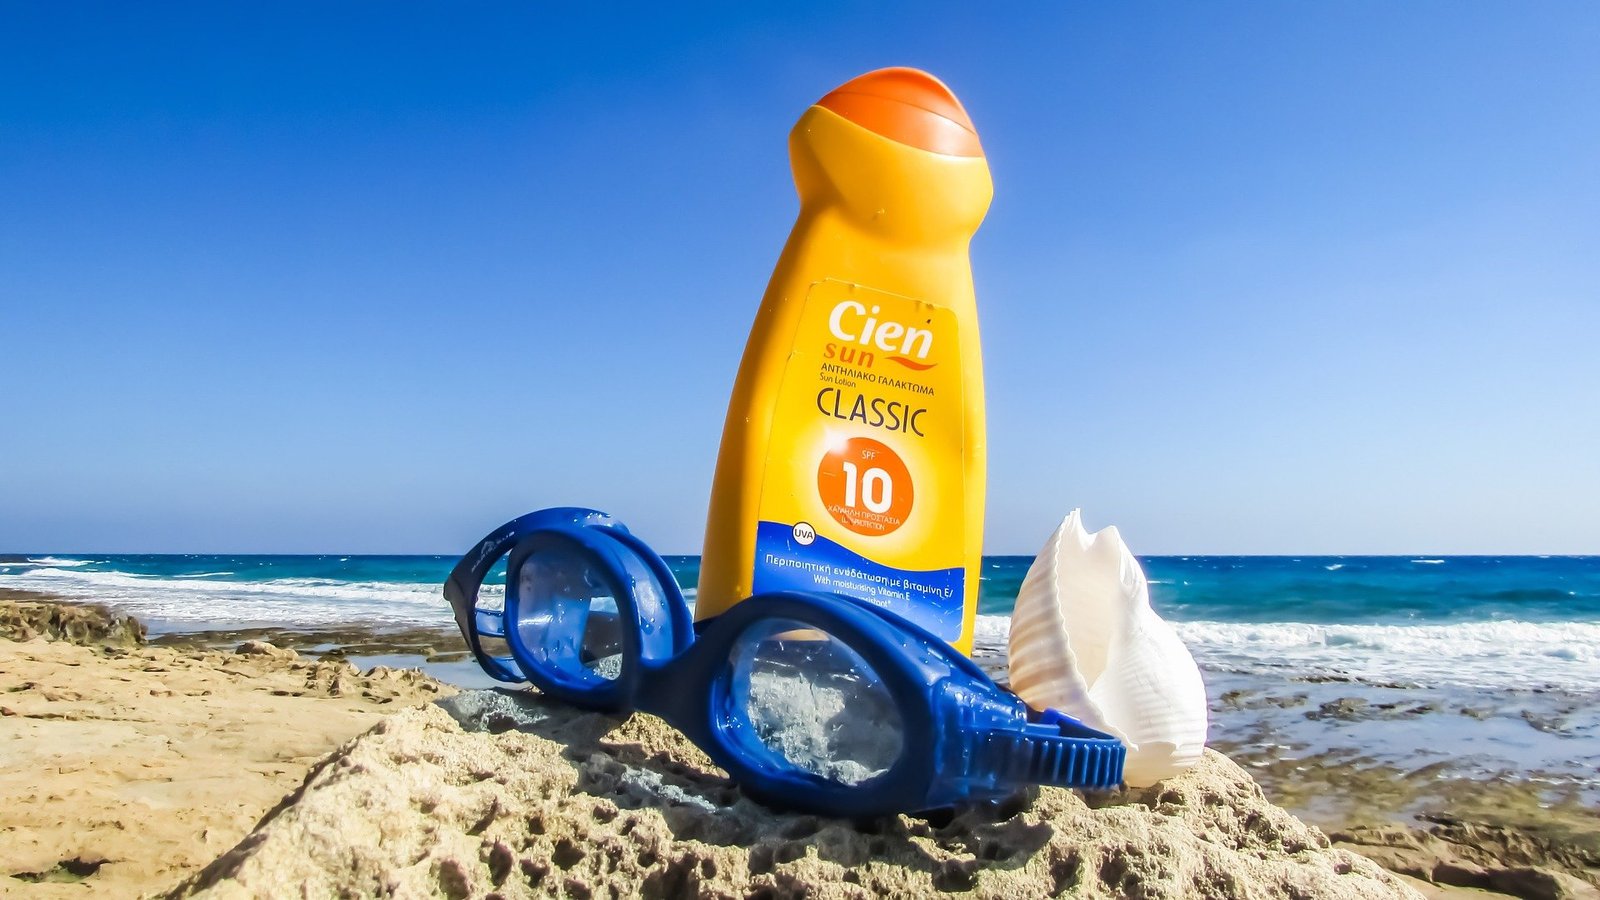 Sunscreen has a shelf life and other facts to know